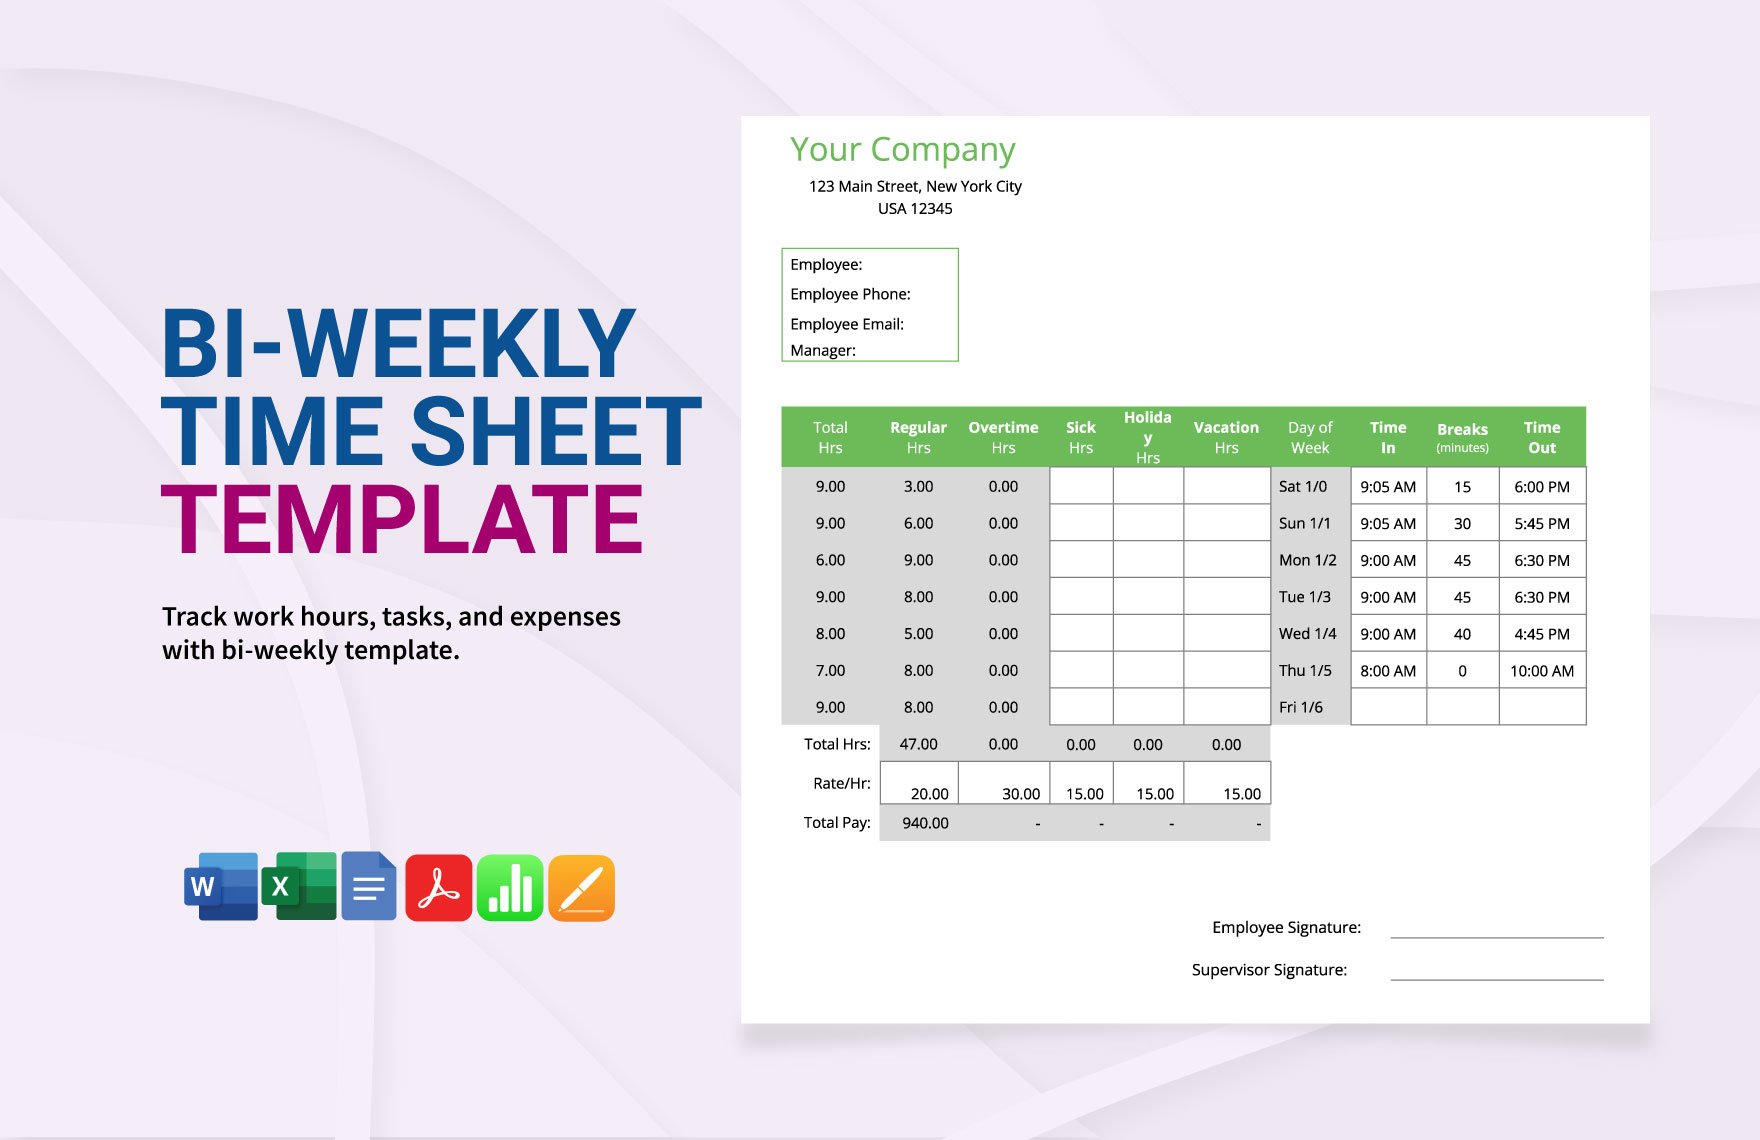 Bi-Weekly Time Sheet Template in Word, Google Docs, Excel, PDF, Apple Pages, Apple Numbers